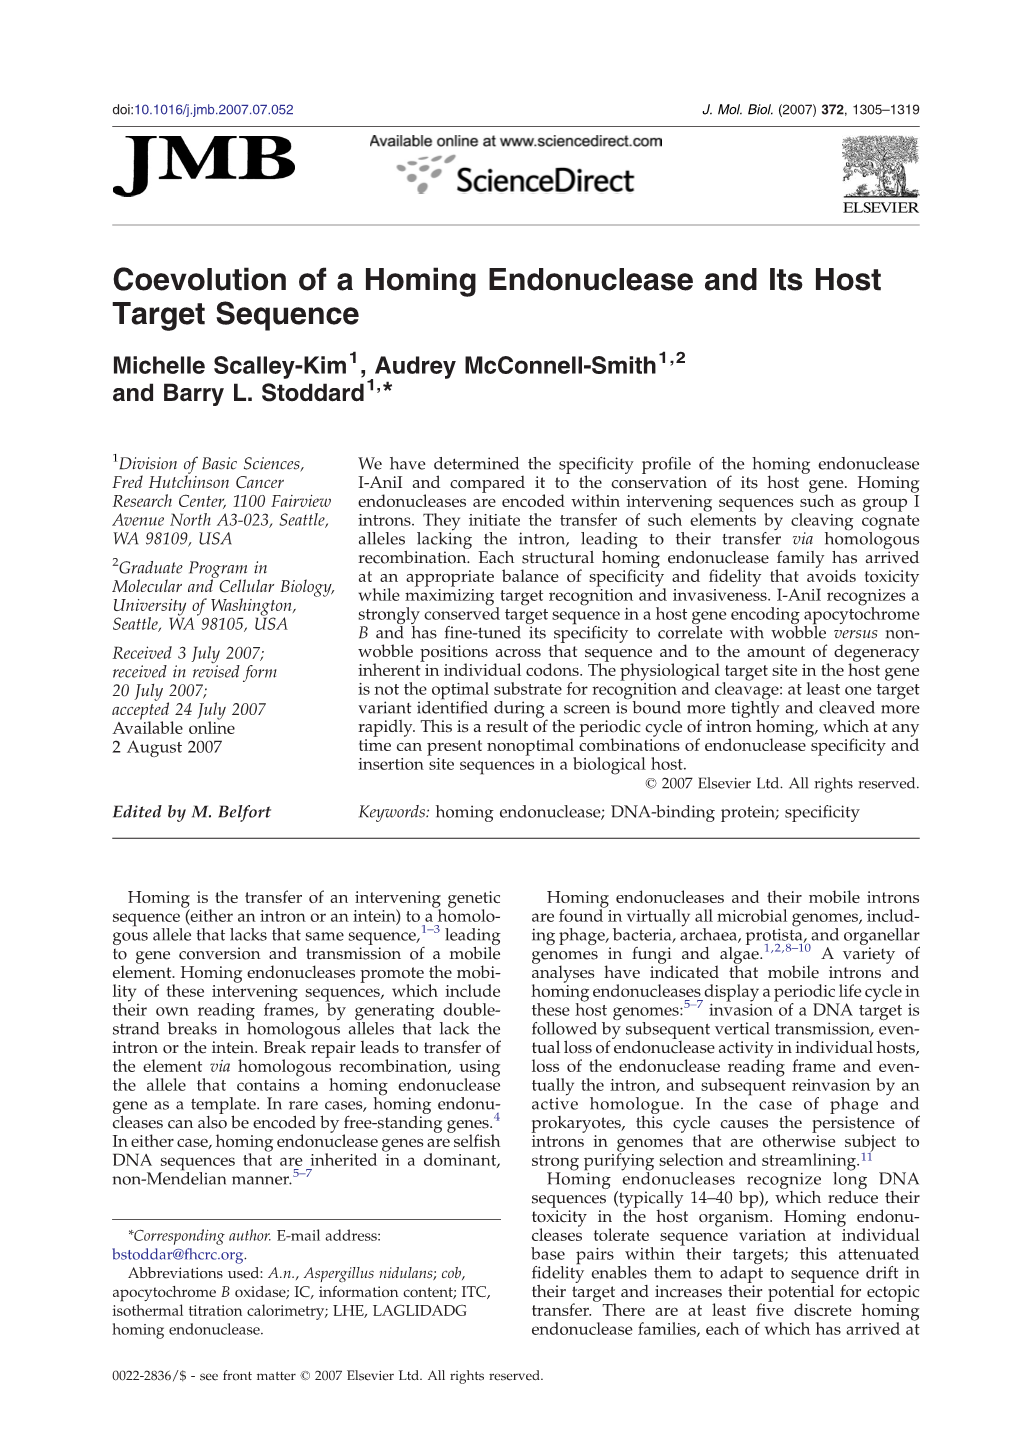 Coevolution of a Homing Endonuclease and Its Host Target Sequence